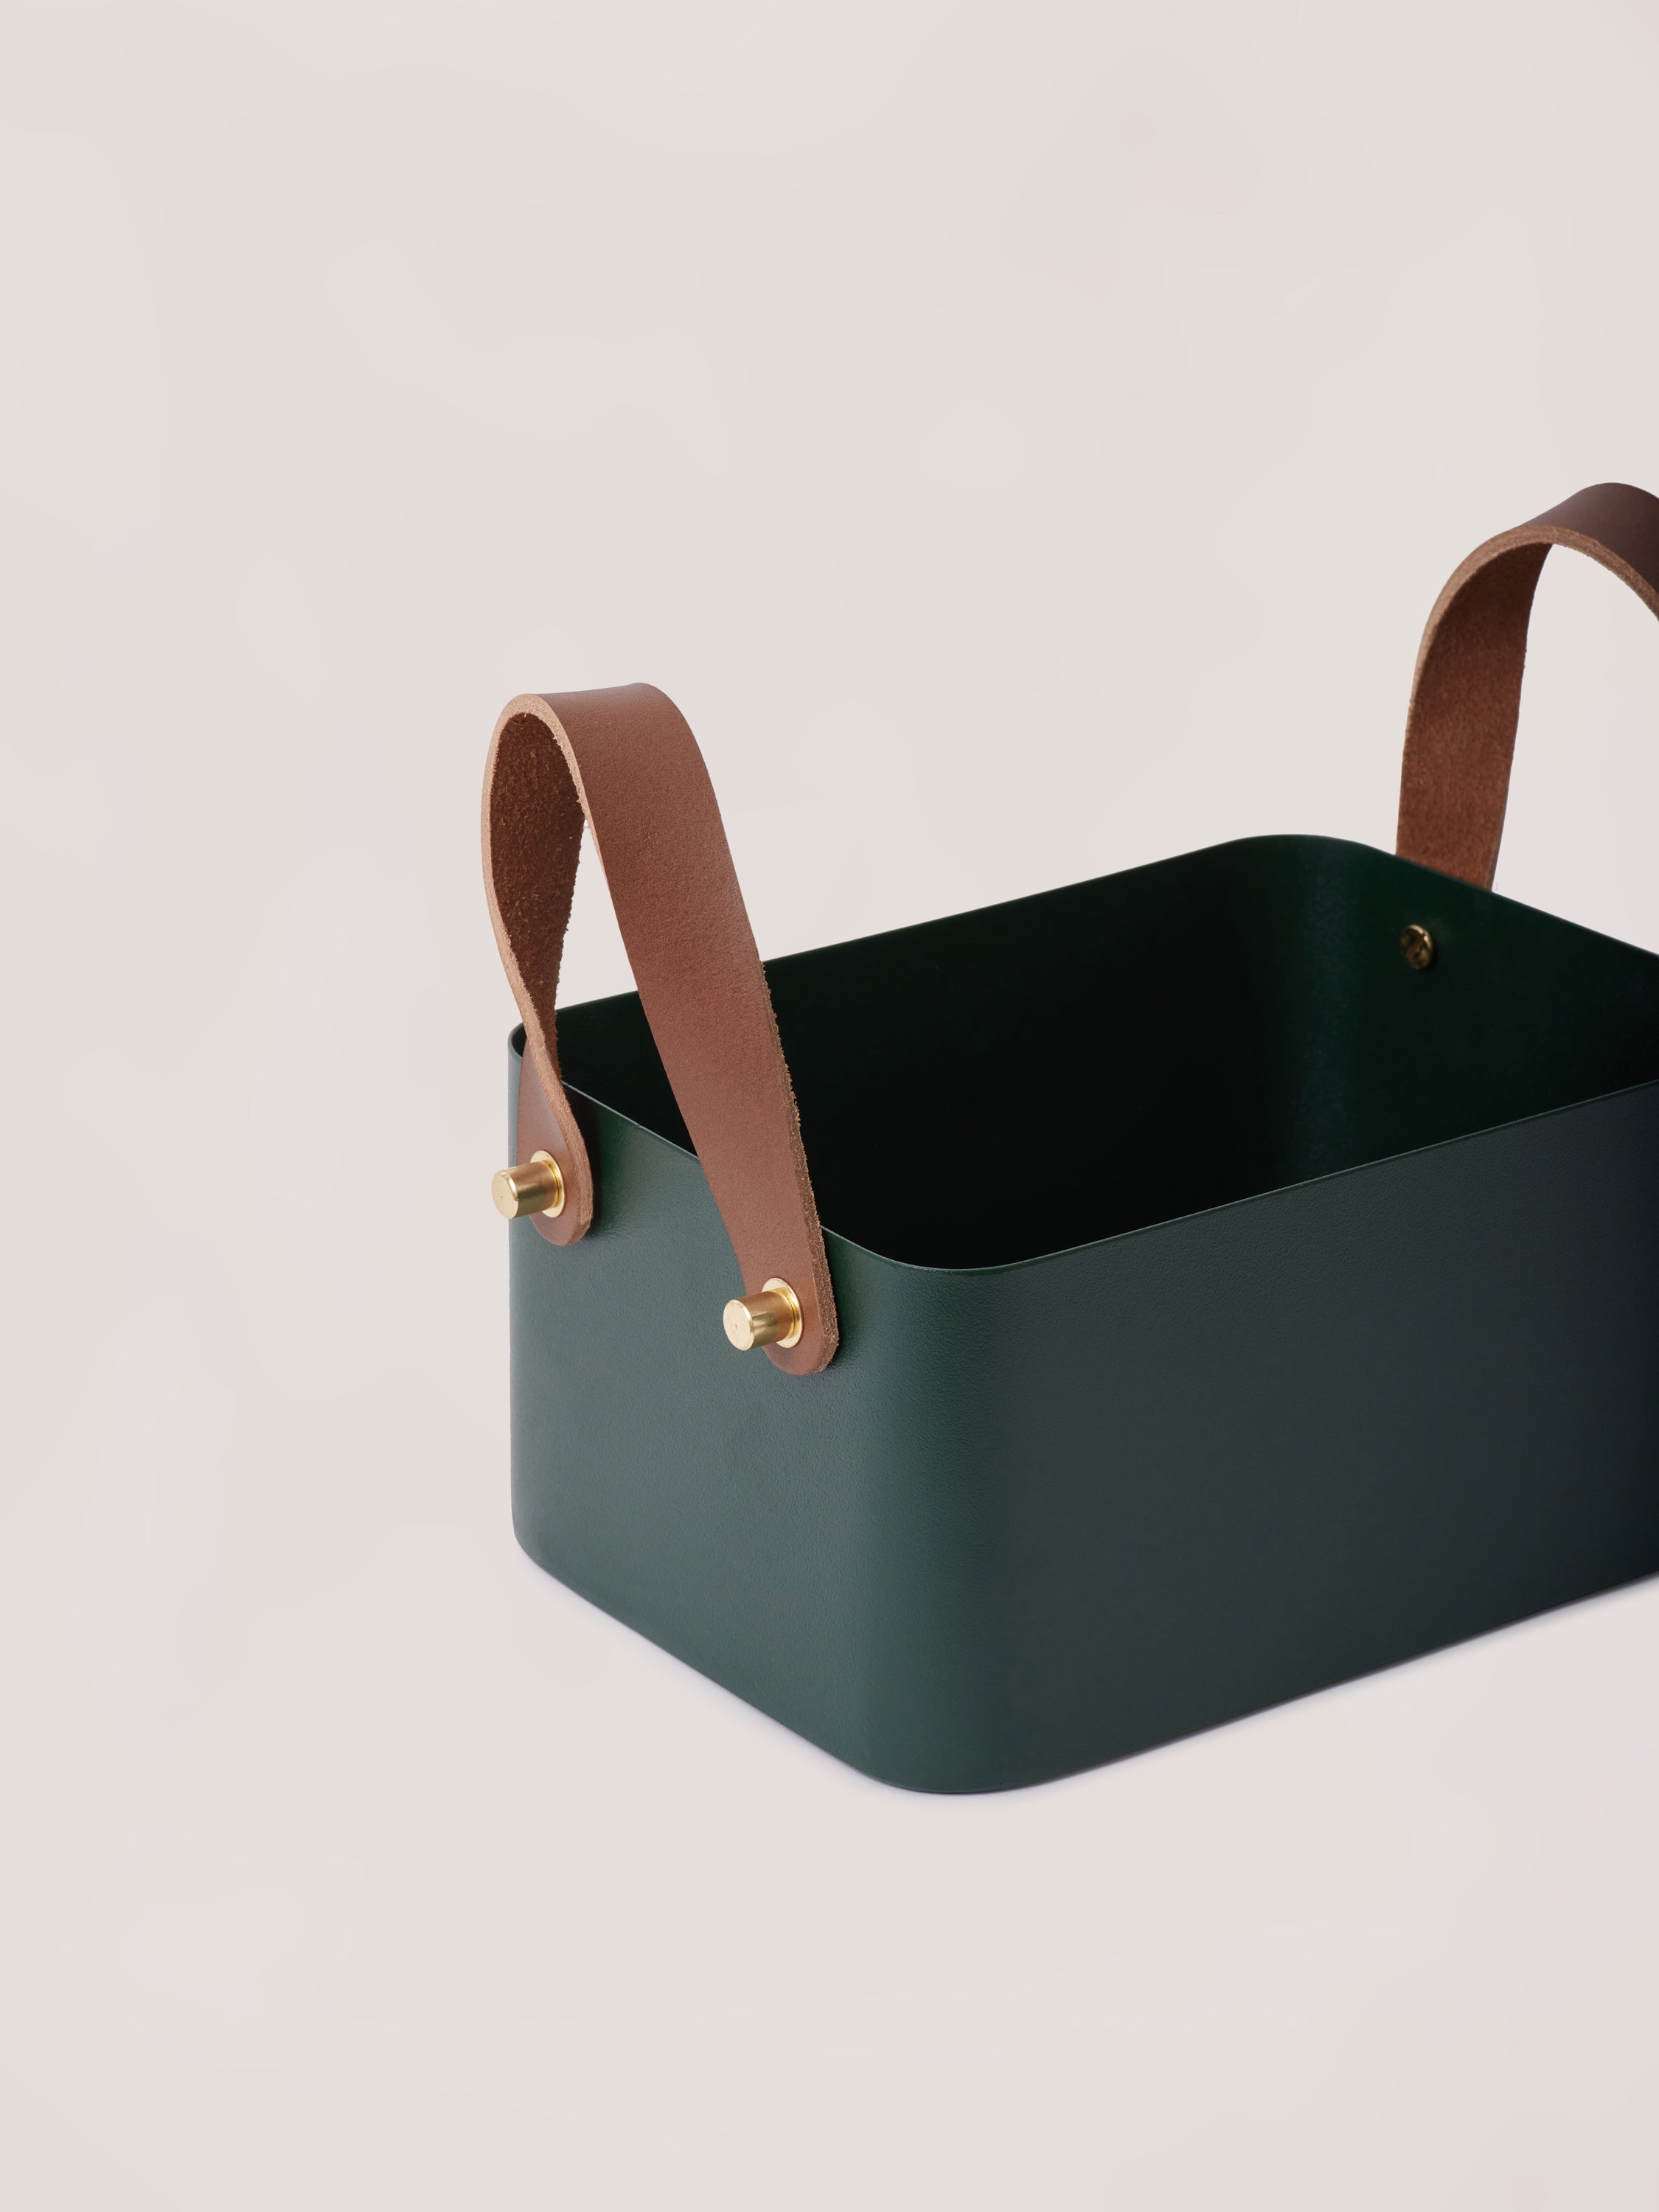 Rectangle Basket - Forest Green, Small - Fleck